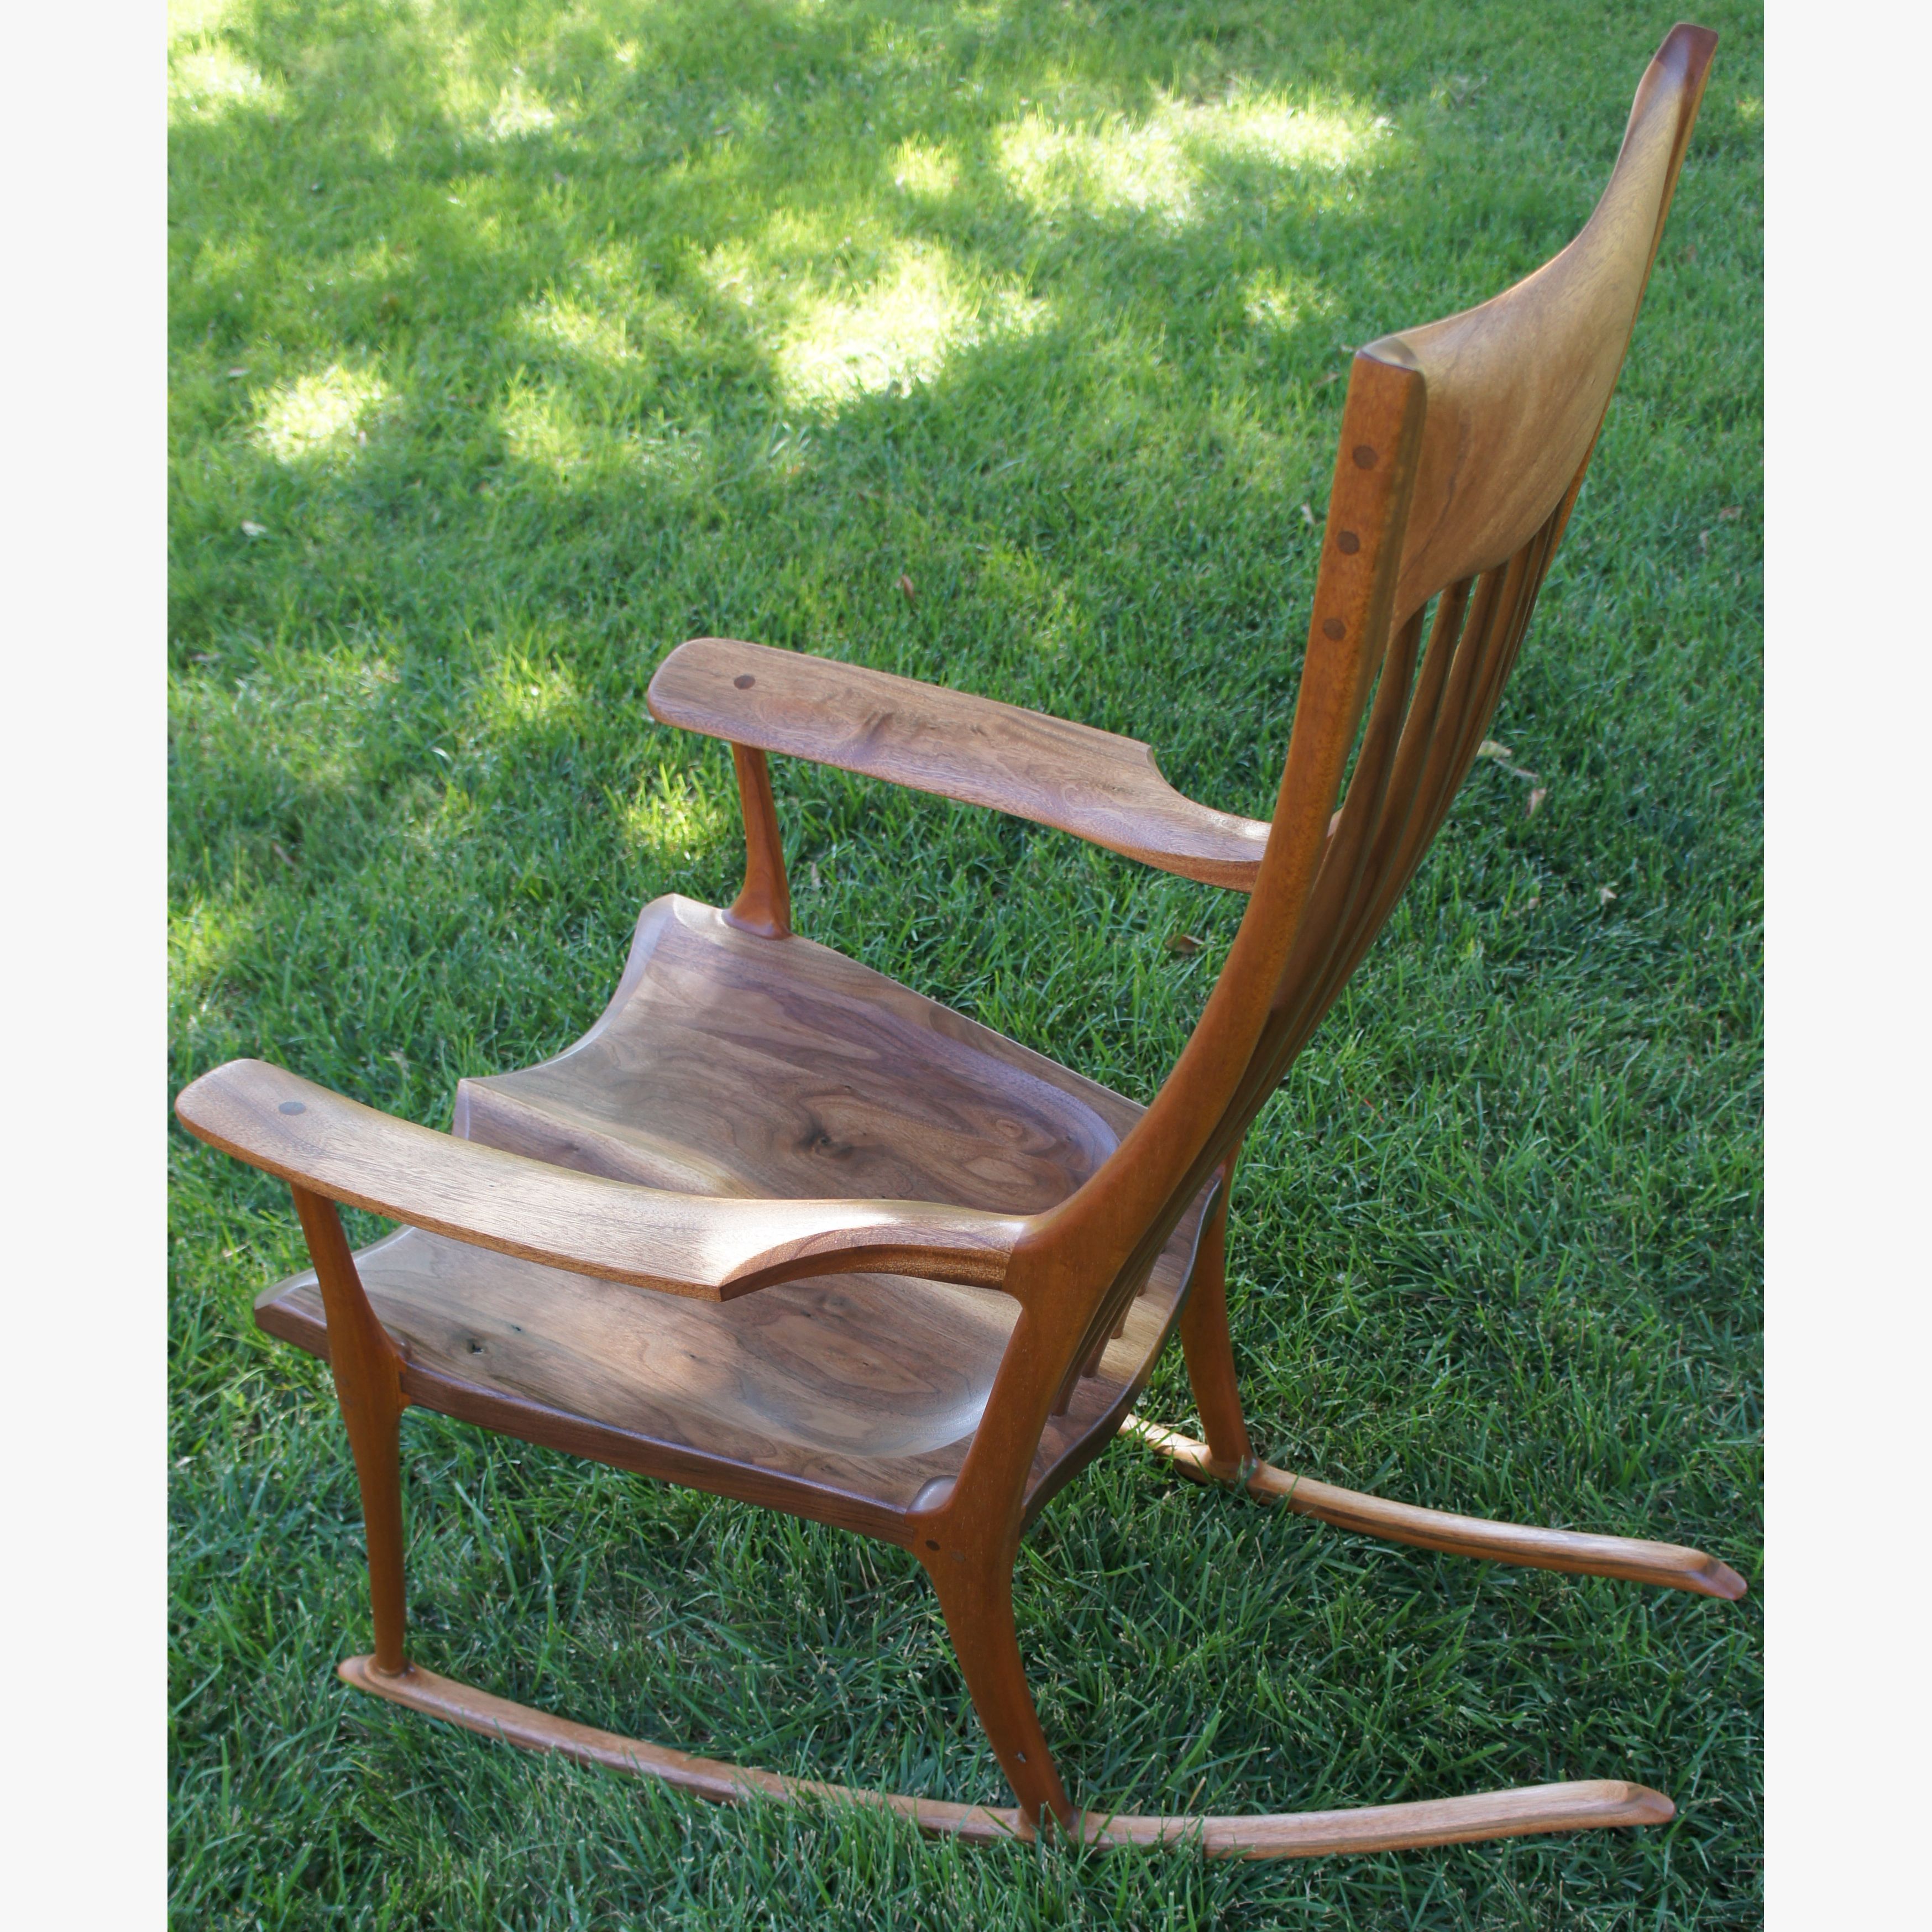 Buy Handmade Classic Rocking Chair, made to order from Jos